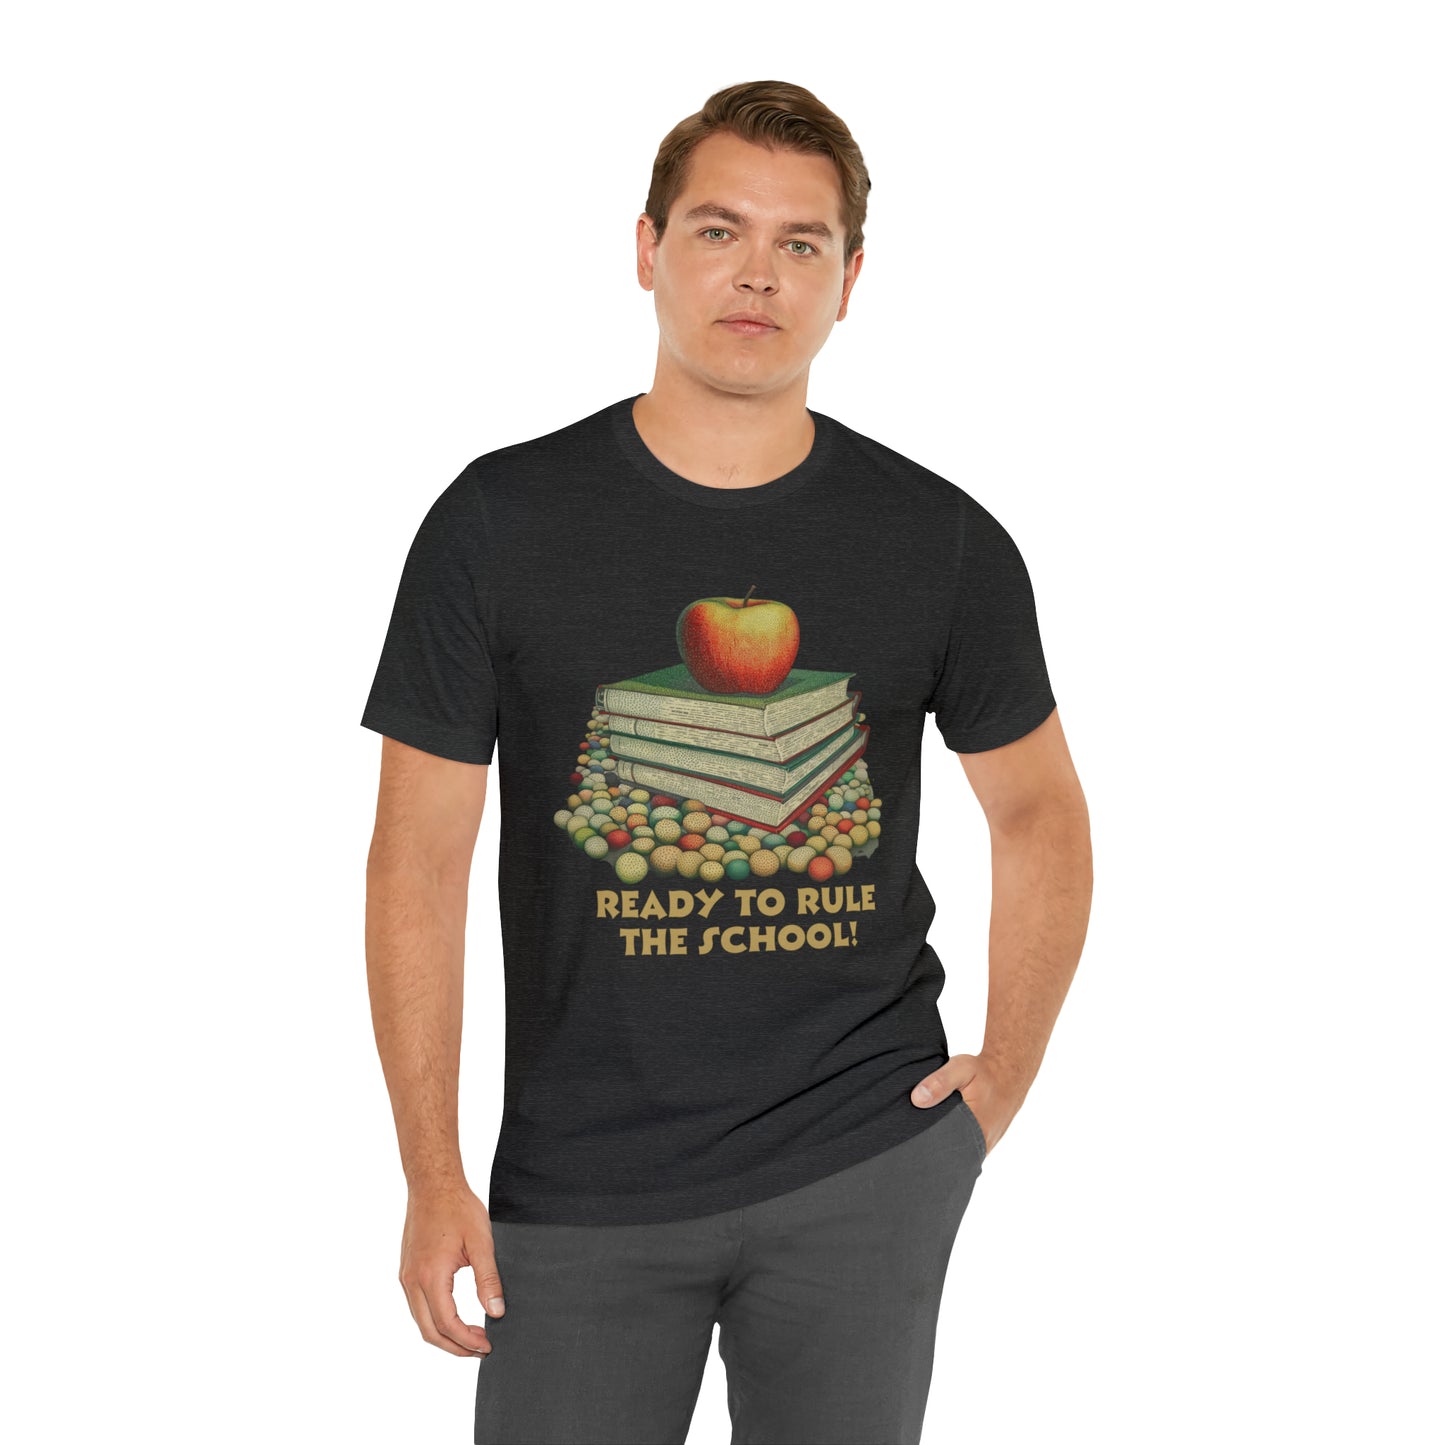 Back to school shirt funny for student - Ready to rule the school, T152